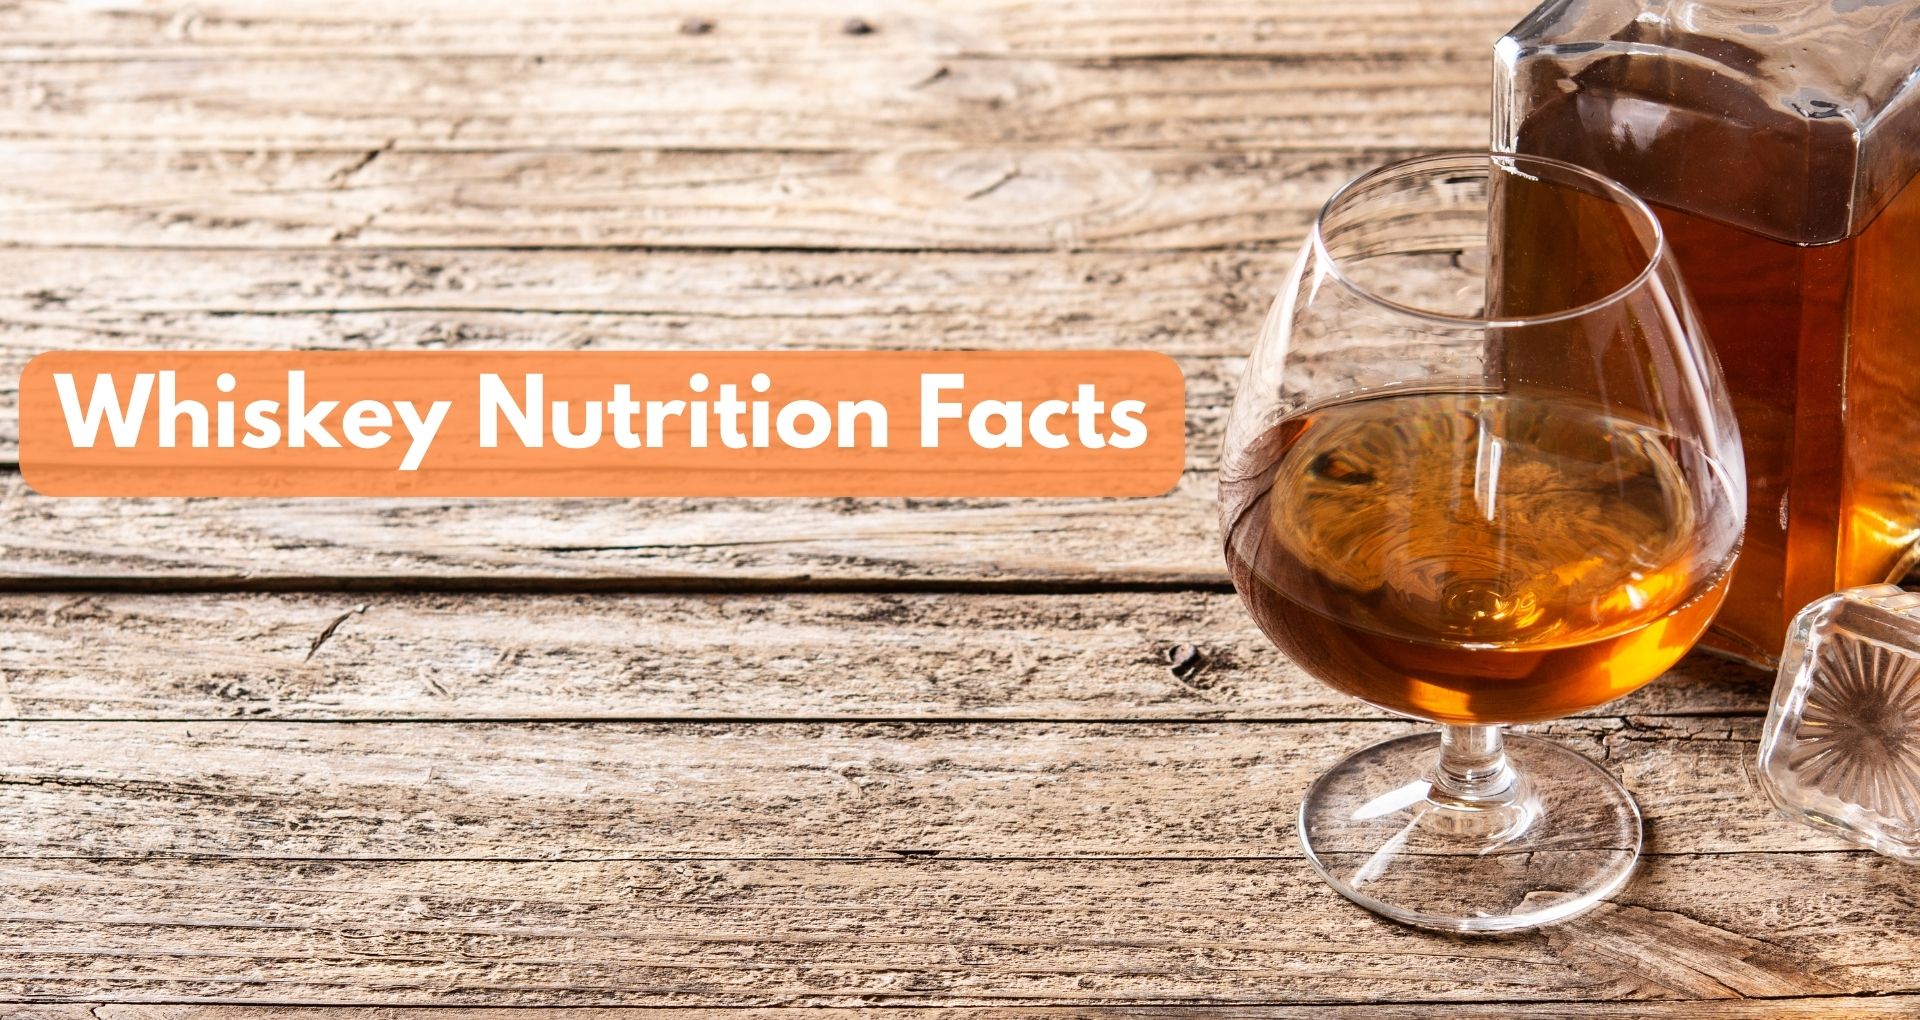 What Are the Whiskey Nutrition Facts?